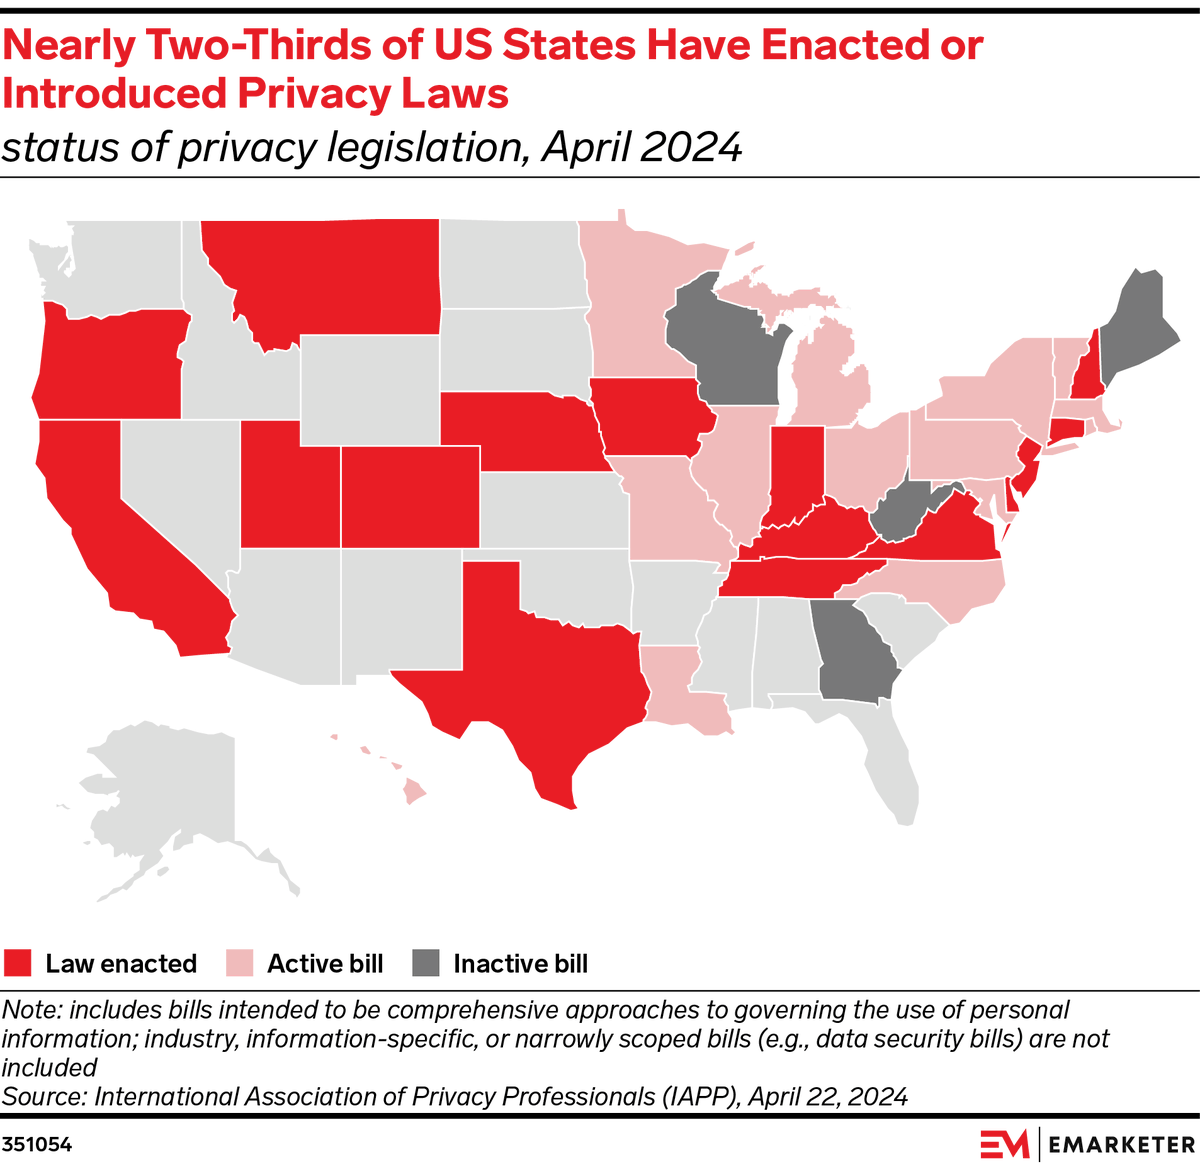 🔑 Key stat: 16 US states have enacted comprehensive consumer privacy laws as of April 2024. 📊 EMARKETER has over 3,000 charts visualizing trends across advertising, marketing, ecommerce, and more. Access them with Chart of the Day: emarketer.com/chart-of-the-d…